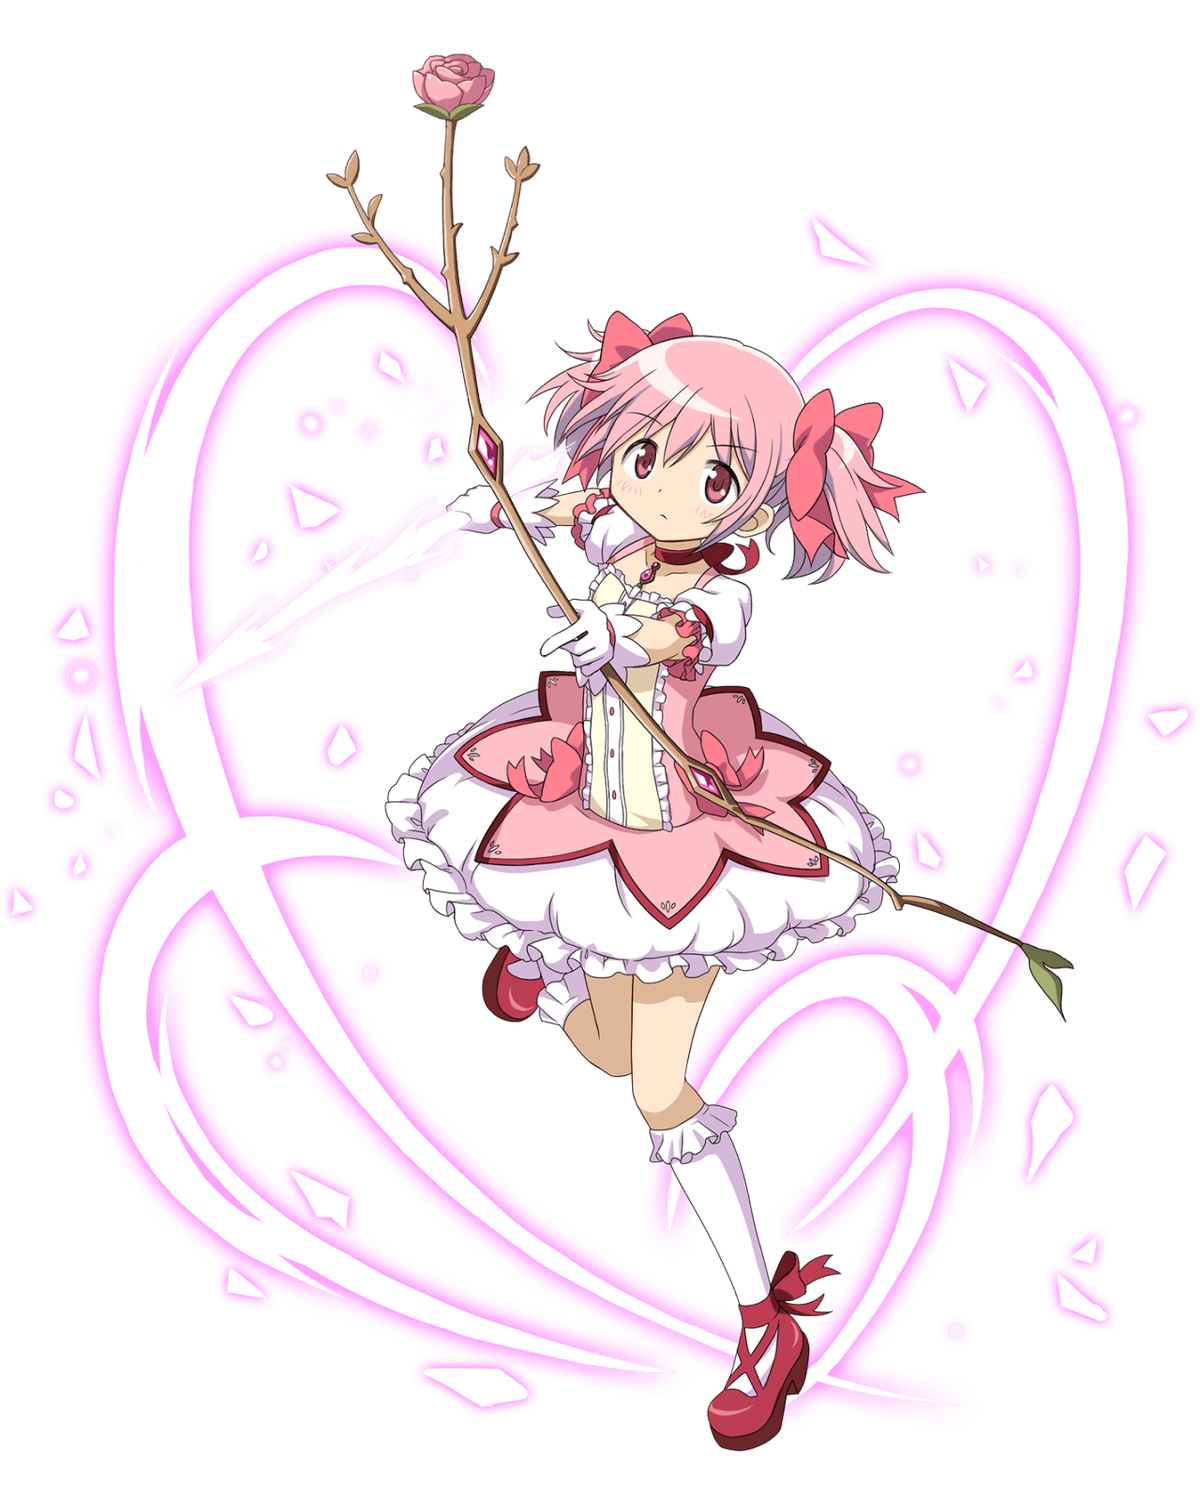 Which Madoka Magica Character Are You Based On Your Zodiac Sign